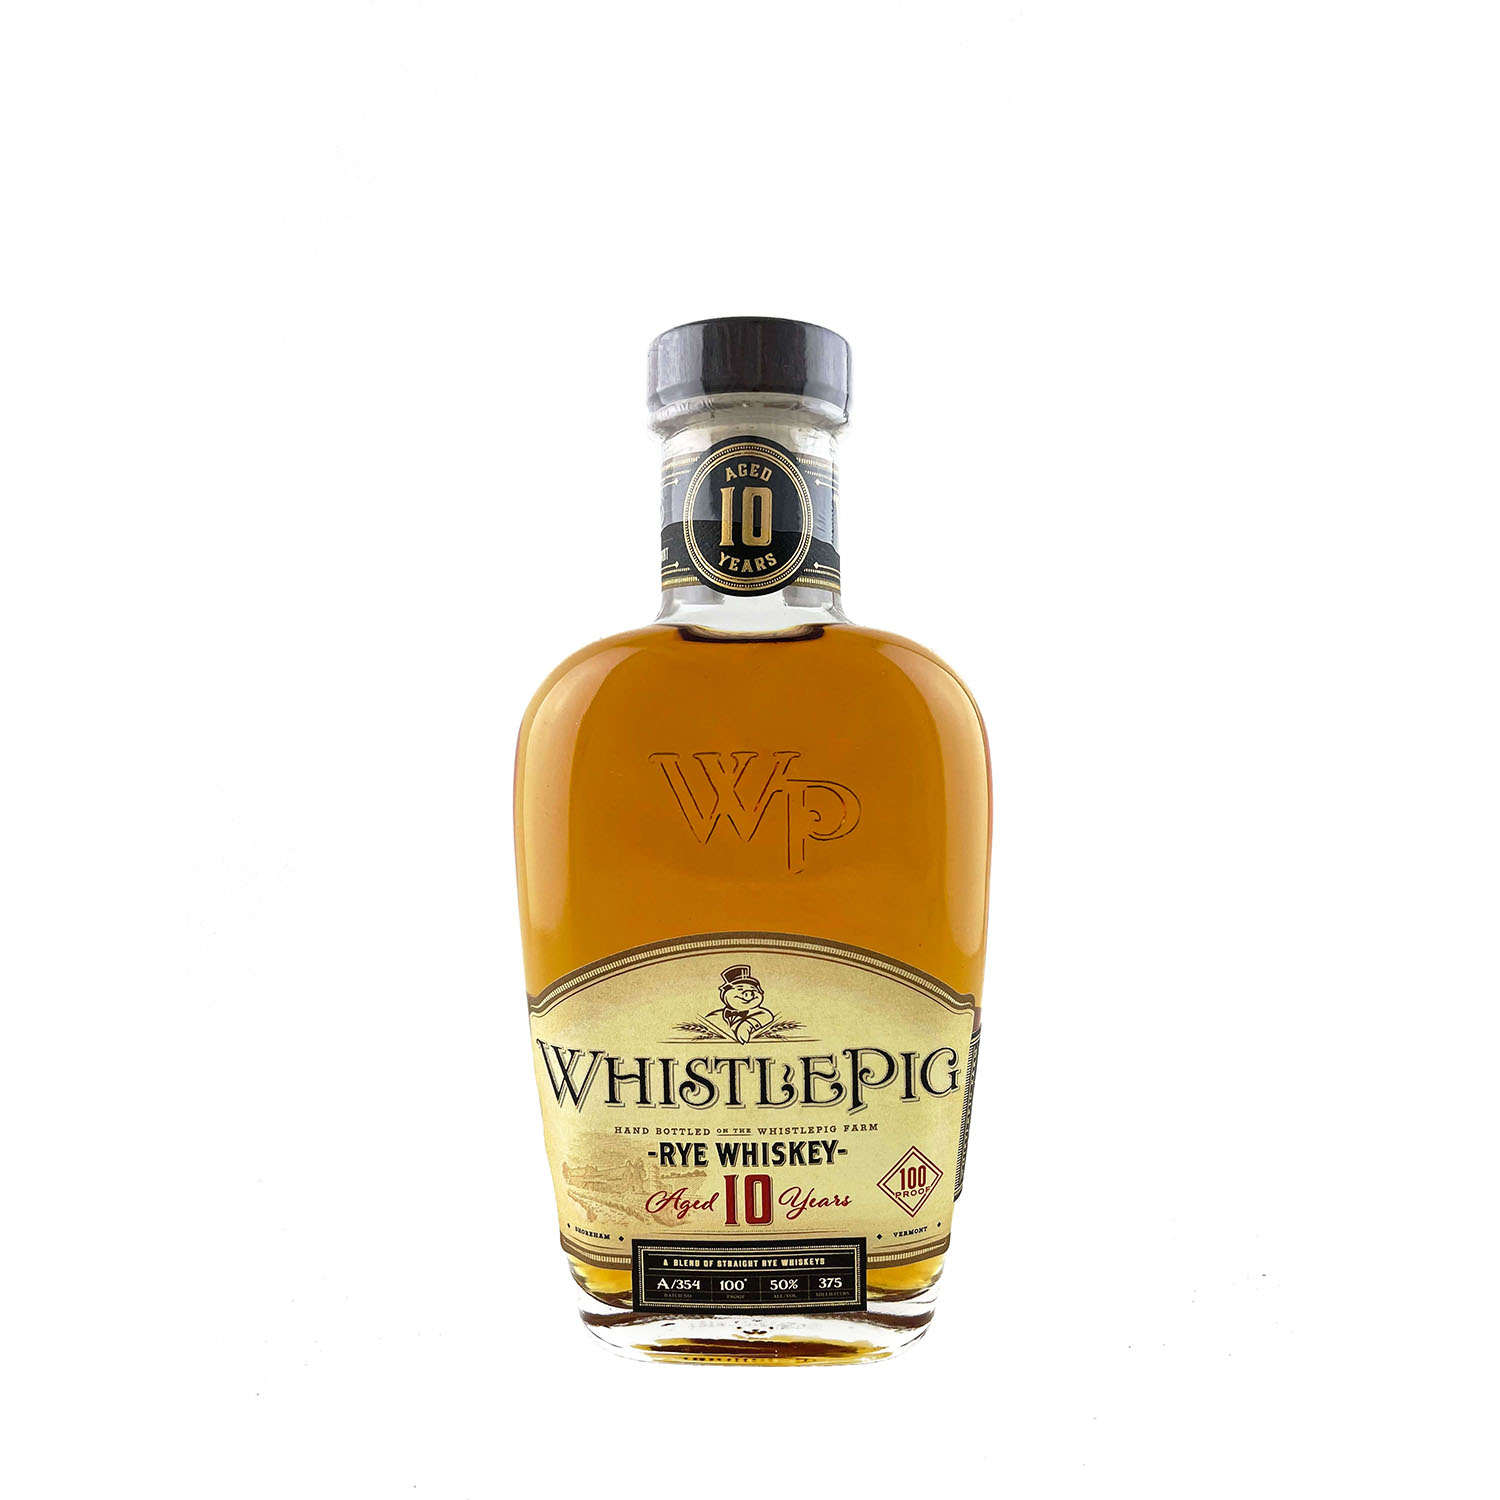 Whistlepig 10 Year Old Straight Rye Whiskey, American Whiskey, The Old Barrelhouse